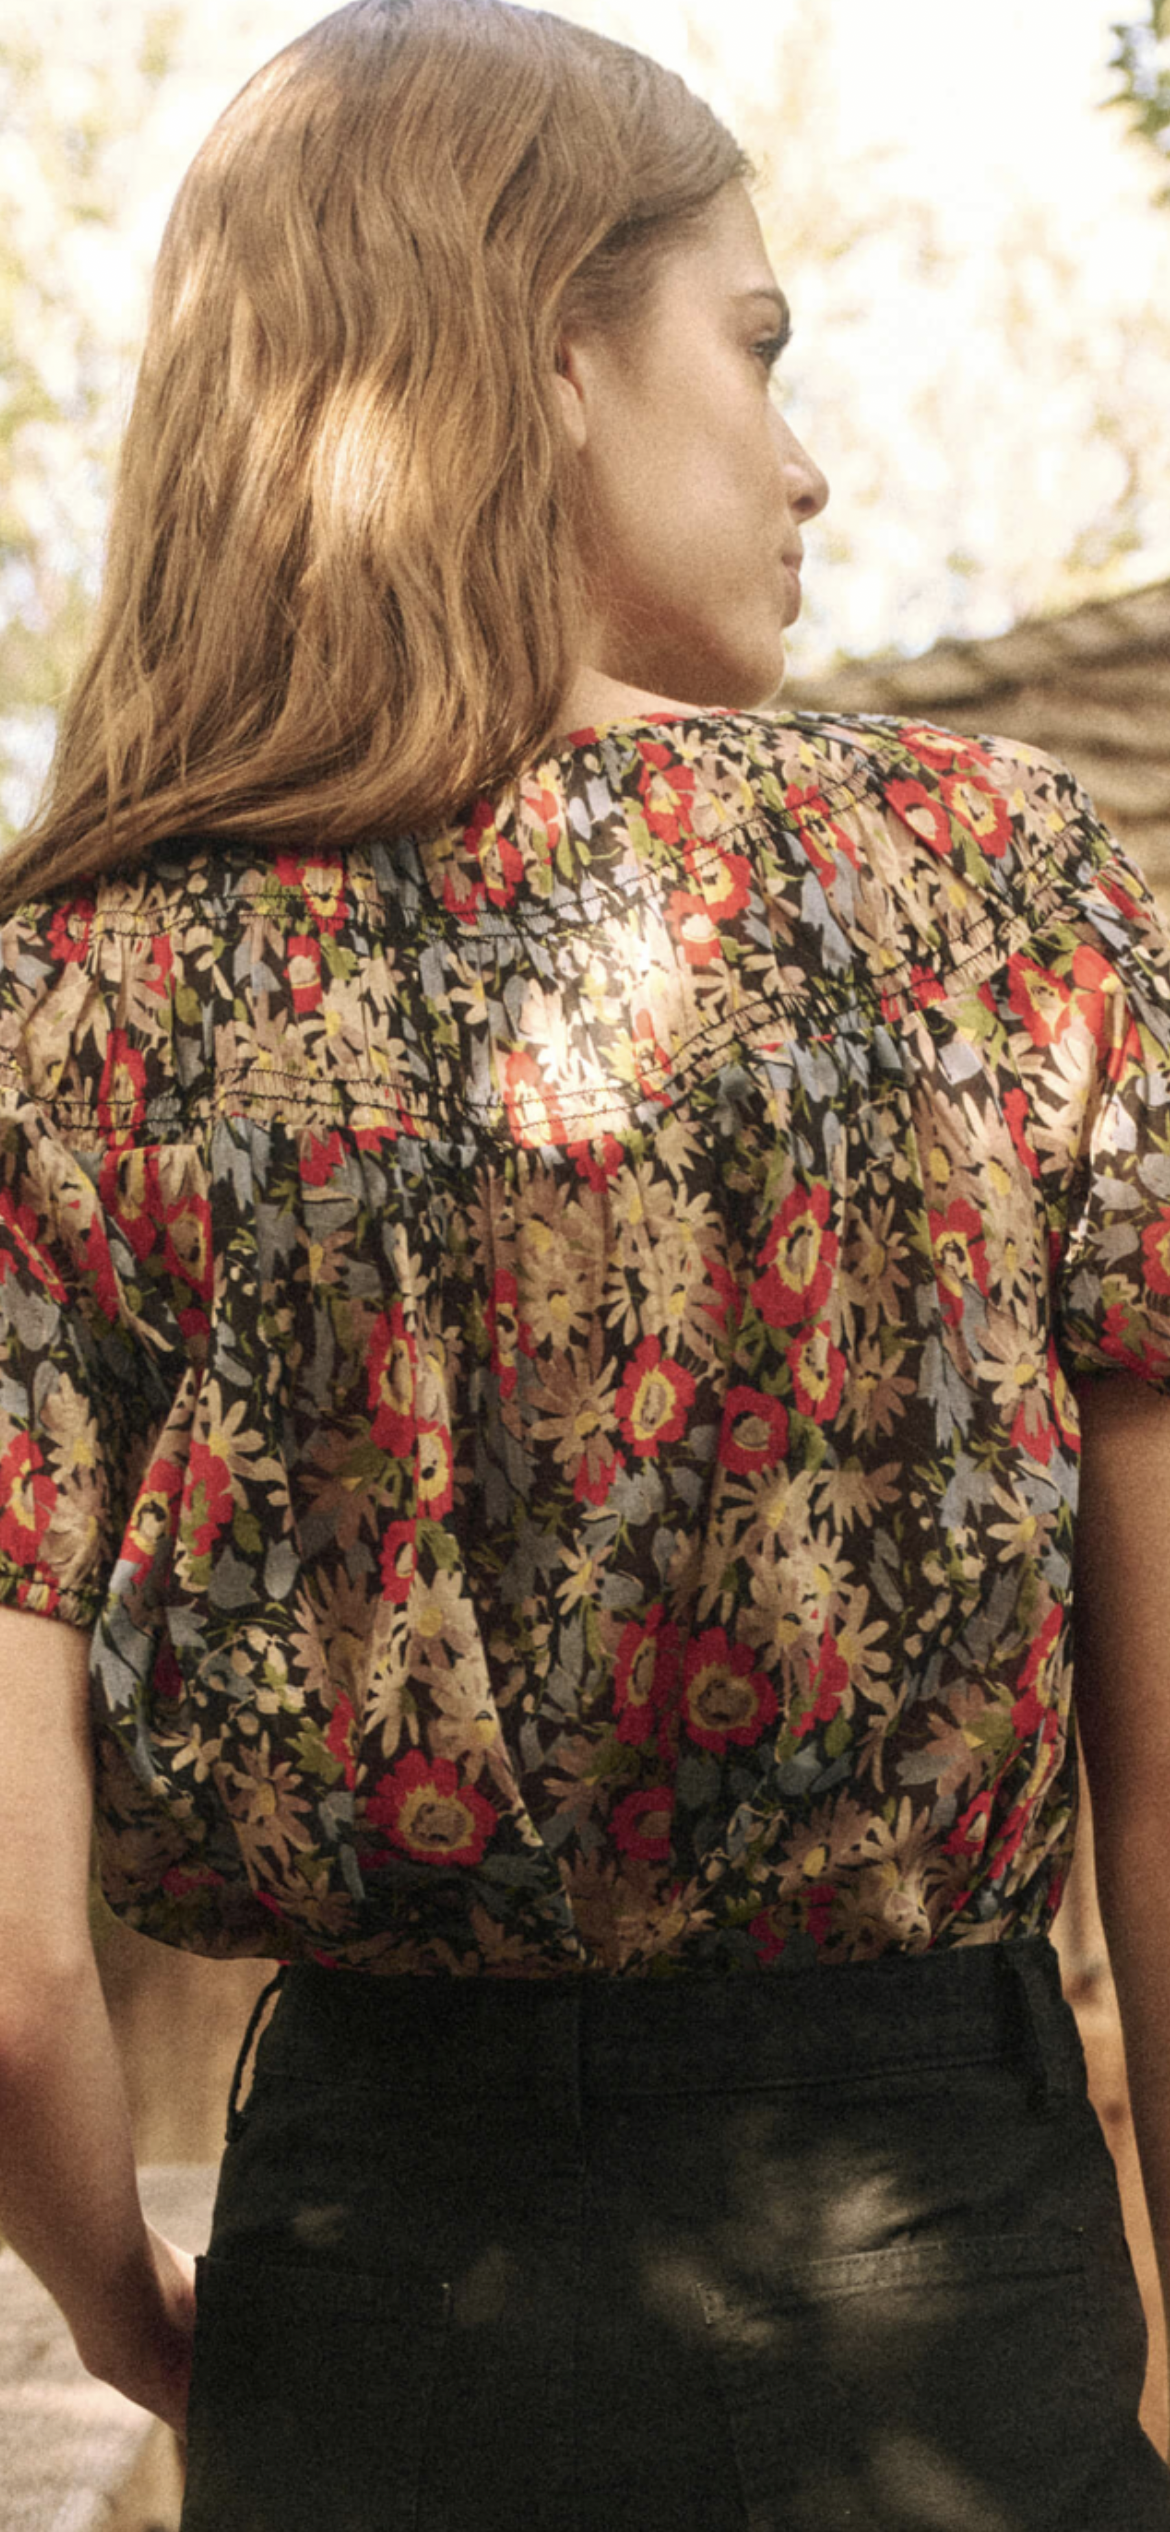 THE GREAT- The Florist Top Twilight Floral